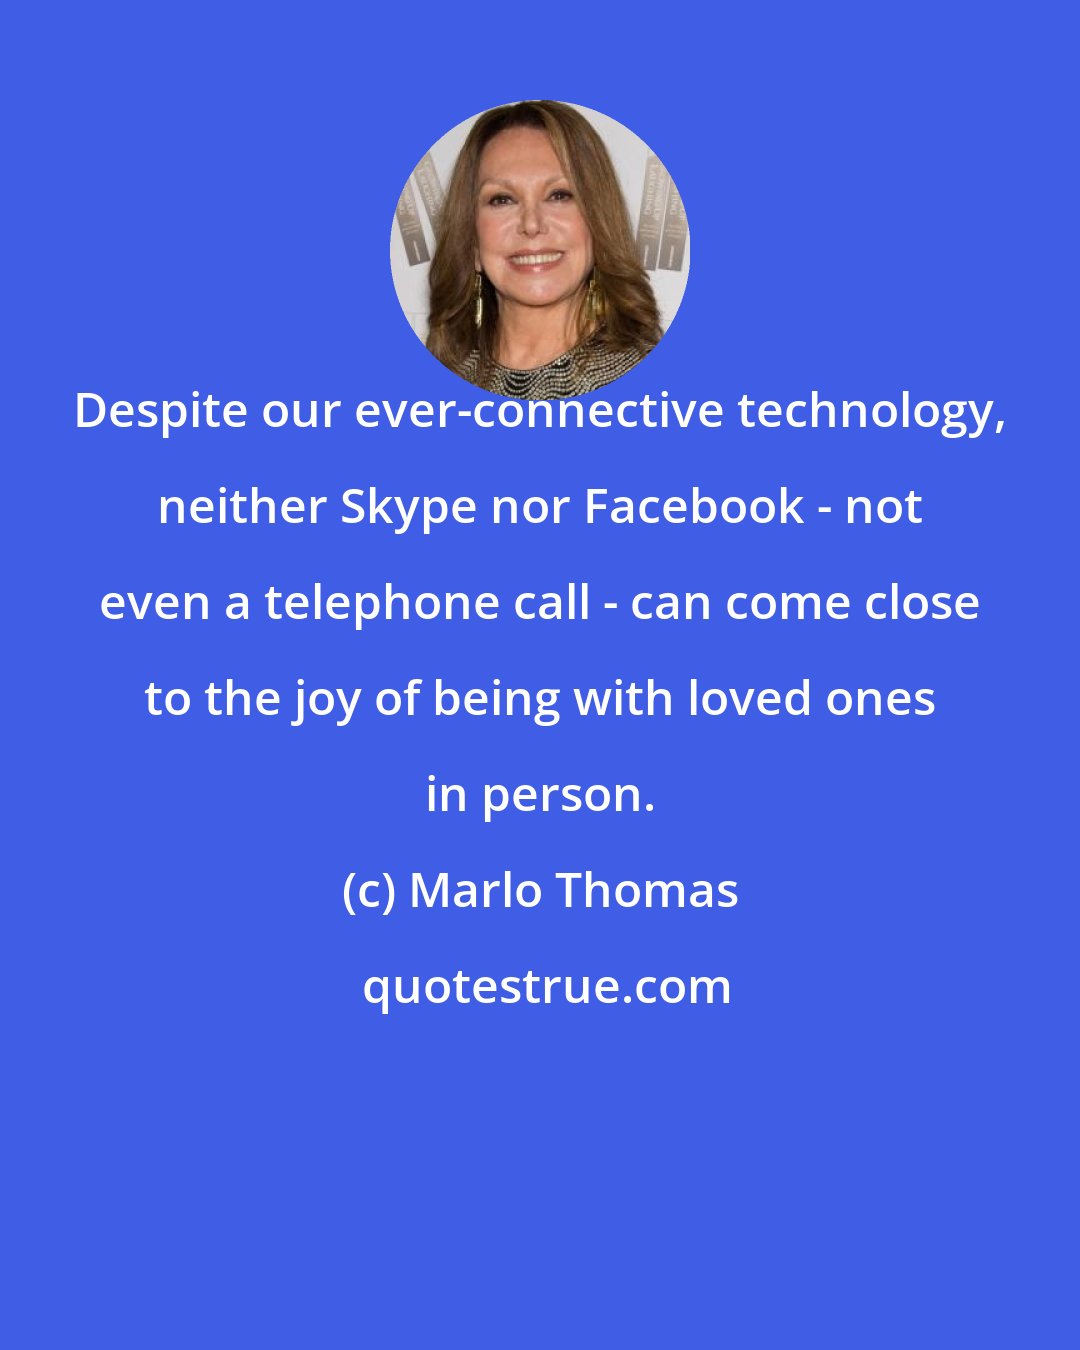 Marlo Thomas: Despite our ever-connective technology, neither Skype nor Facebook - not even a telephone call - can come close to the joy of being with loved ones in person.